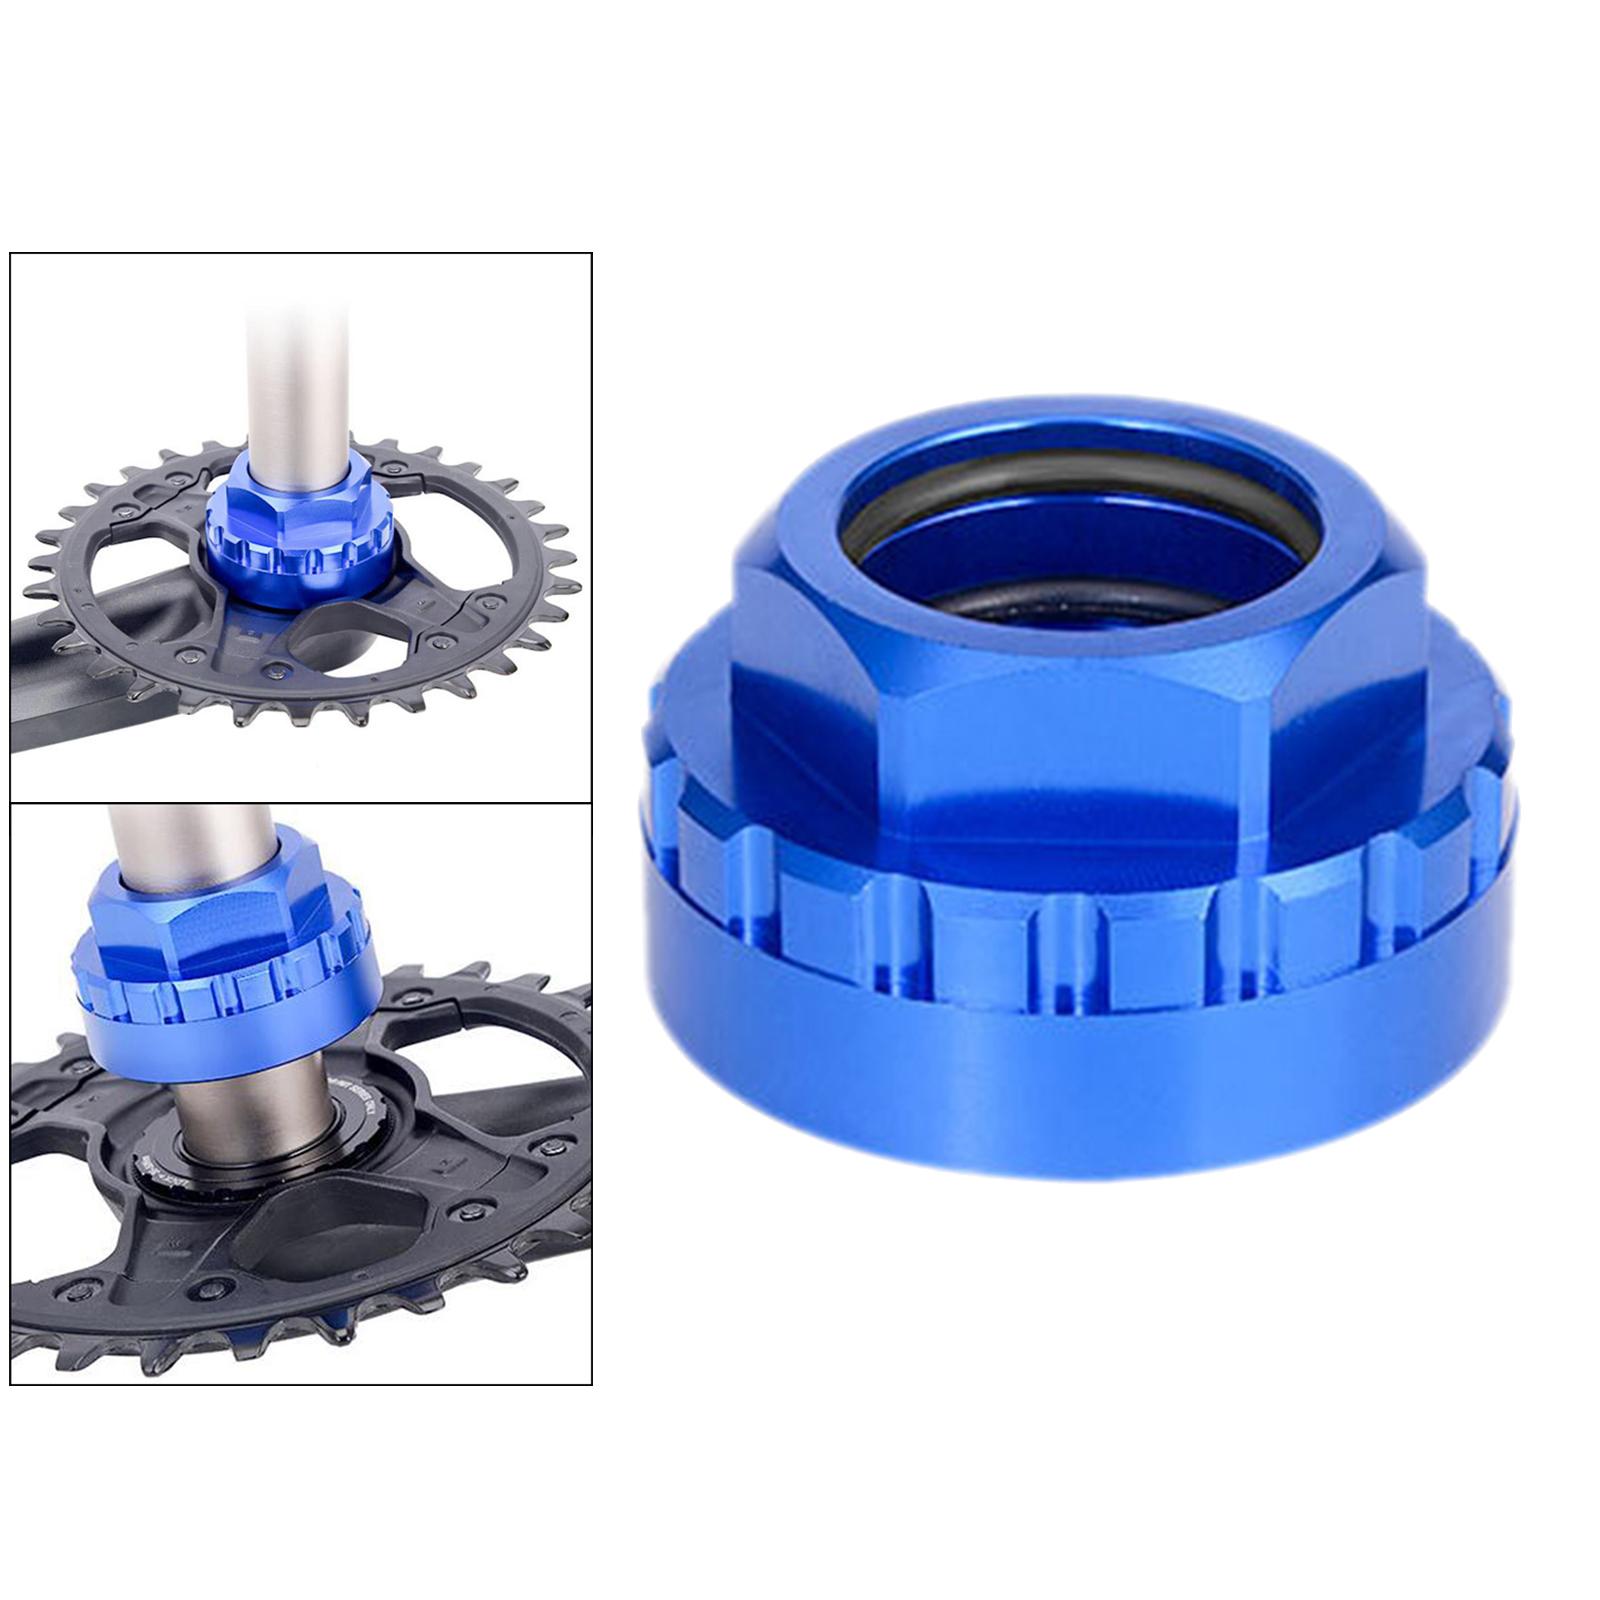 12-Speed Chainring Lock Ring Road Bike Rotor Lockring Bottom Bracket Chainset Removal Installation Tool Bicycle Cycle Equipment for Shimano M7100